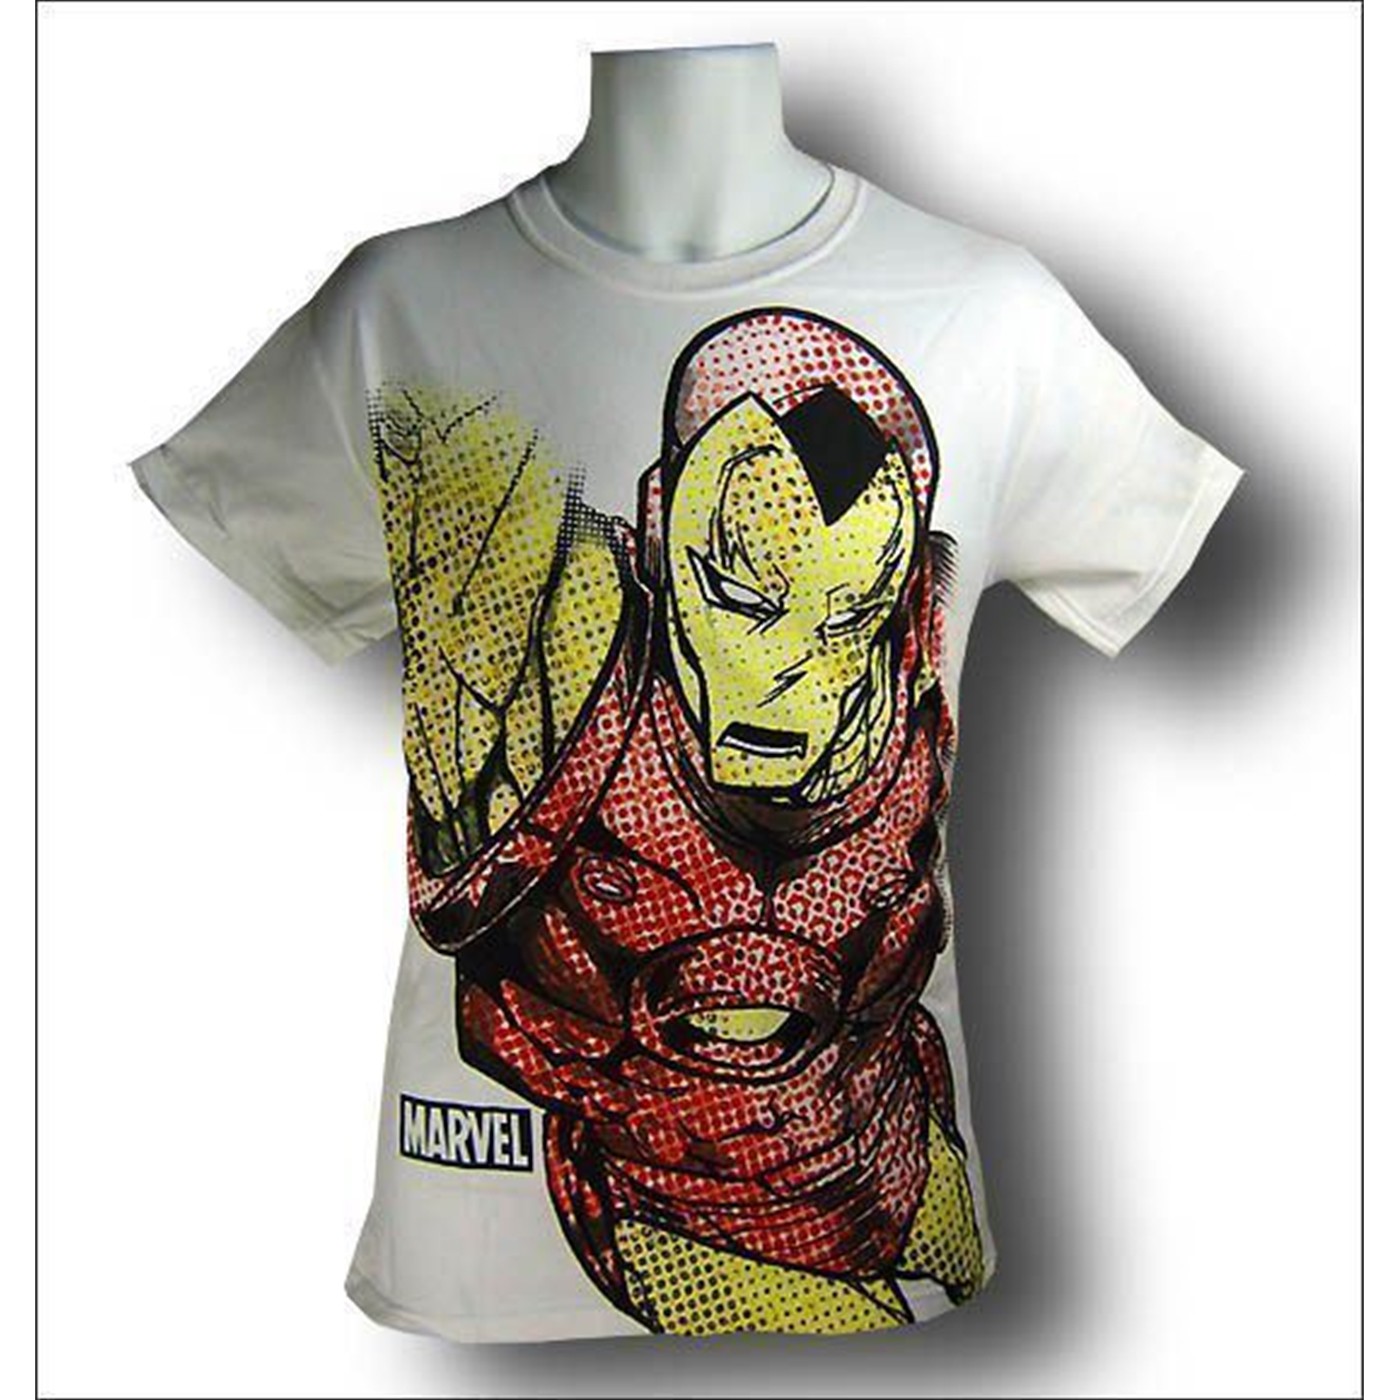 Iron Man Rendered in Dots T-Shirt